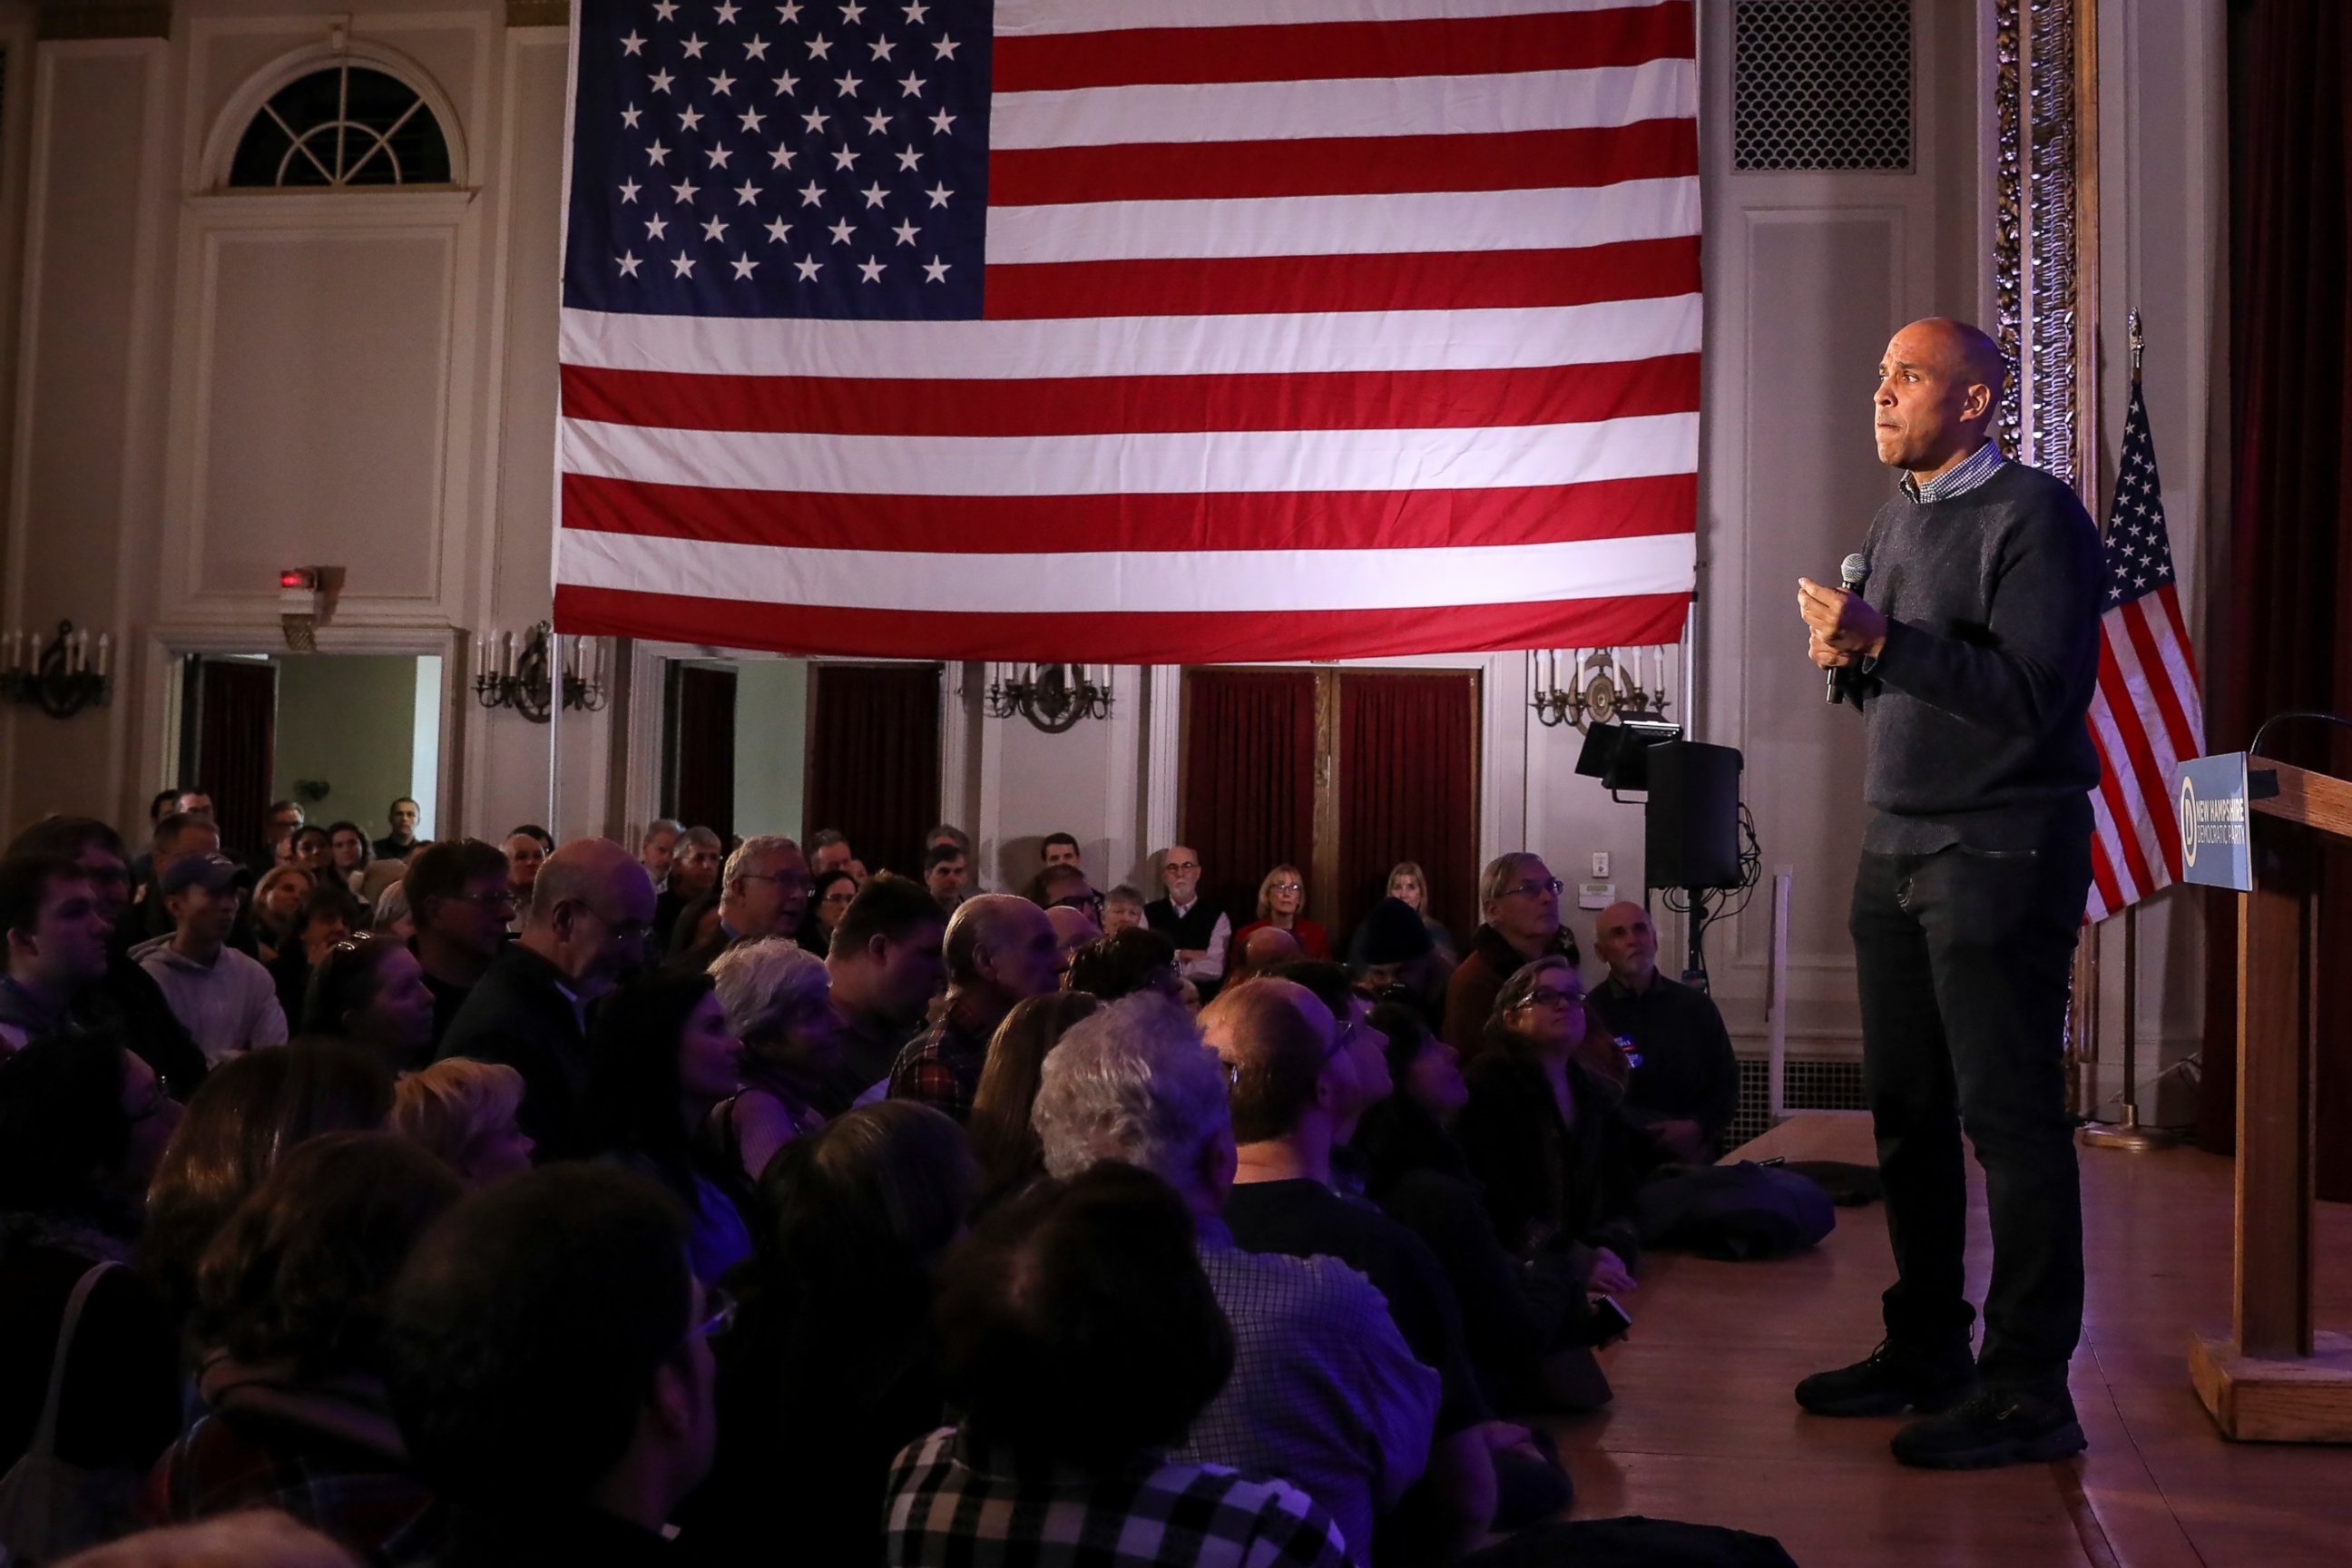 PHOTO: U.S. Sen. Cory Booker, D-N.J., pauses while sharing a personal story while speaking at a post-midterm election victory celebration in Manchester, N.H., on Sunday, Dec. 8, 2018.